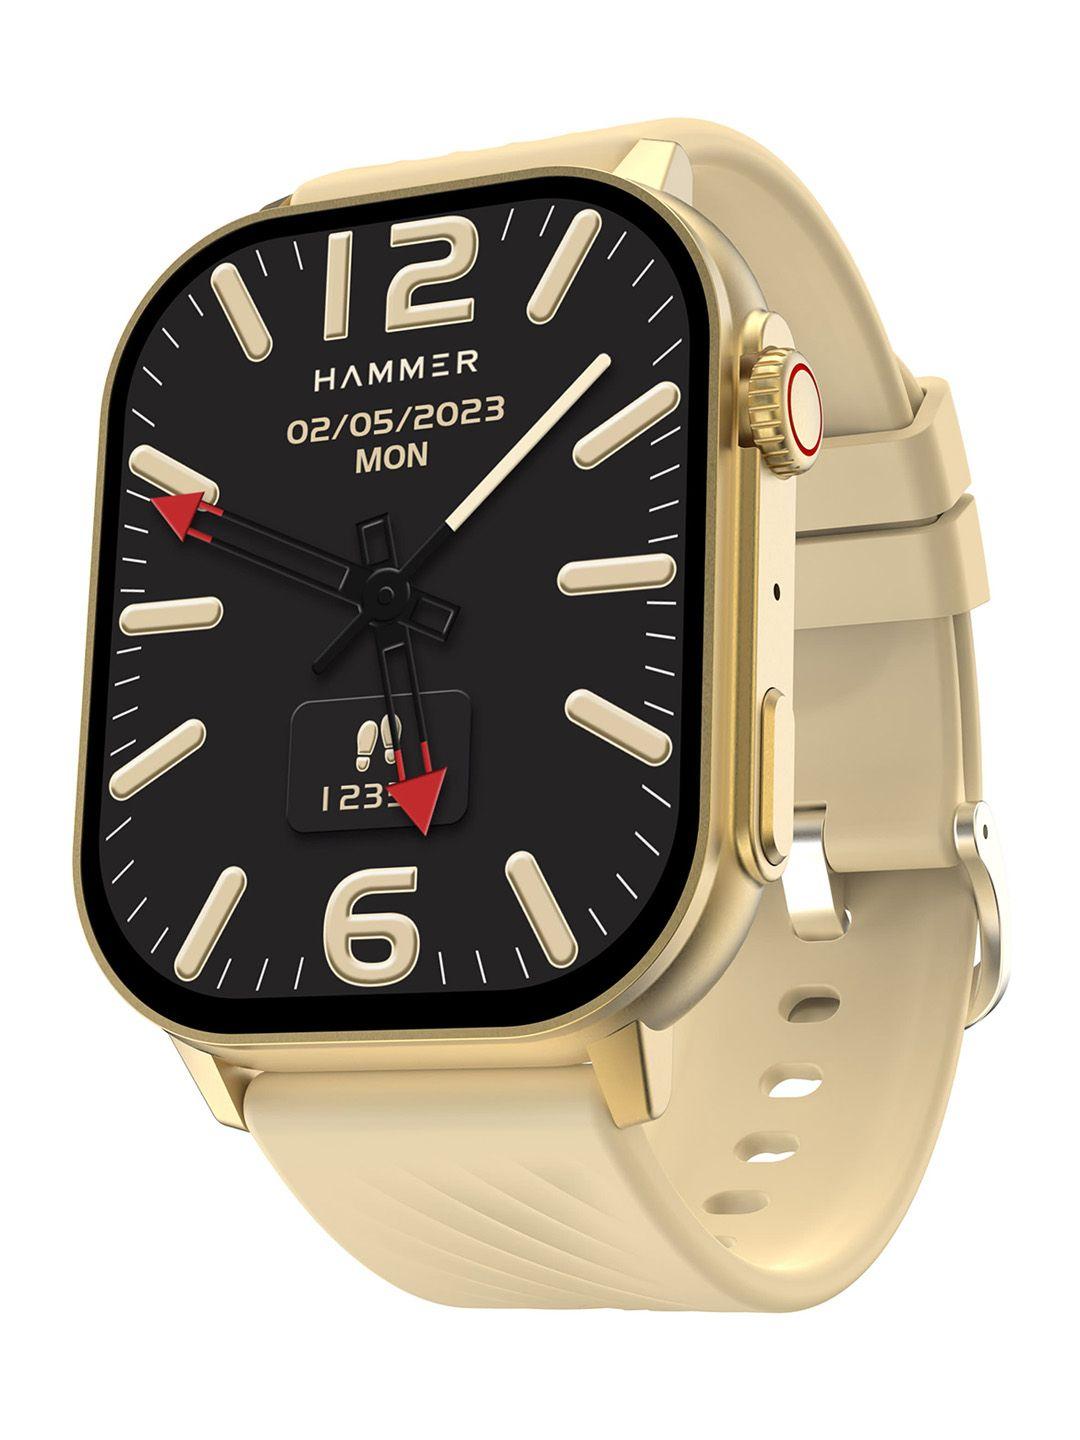 hammer-champagne-gold-arctic-2.04-inch-super-amoled-smart-watch-with-bt-calling